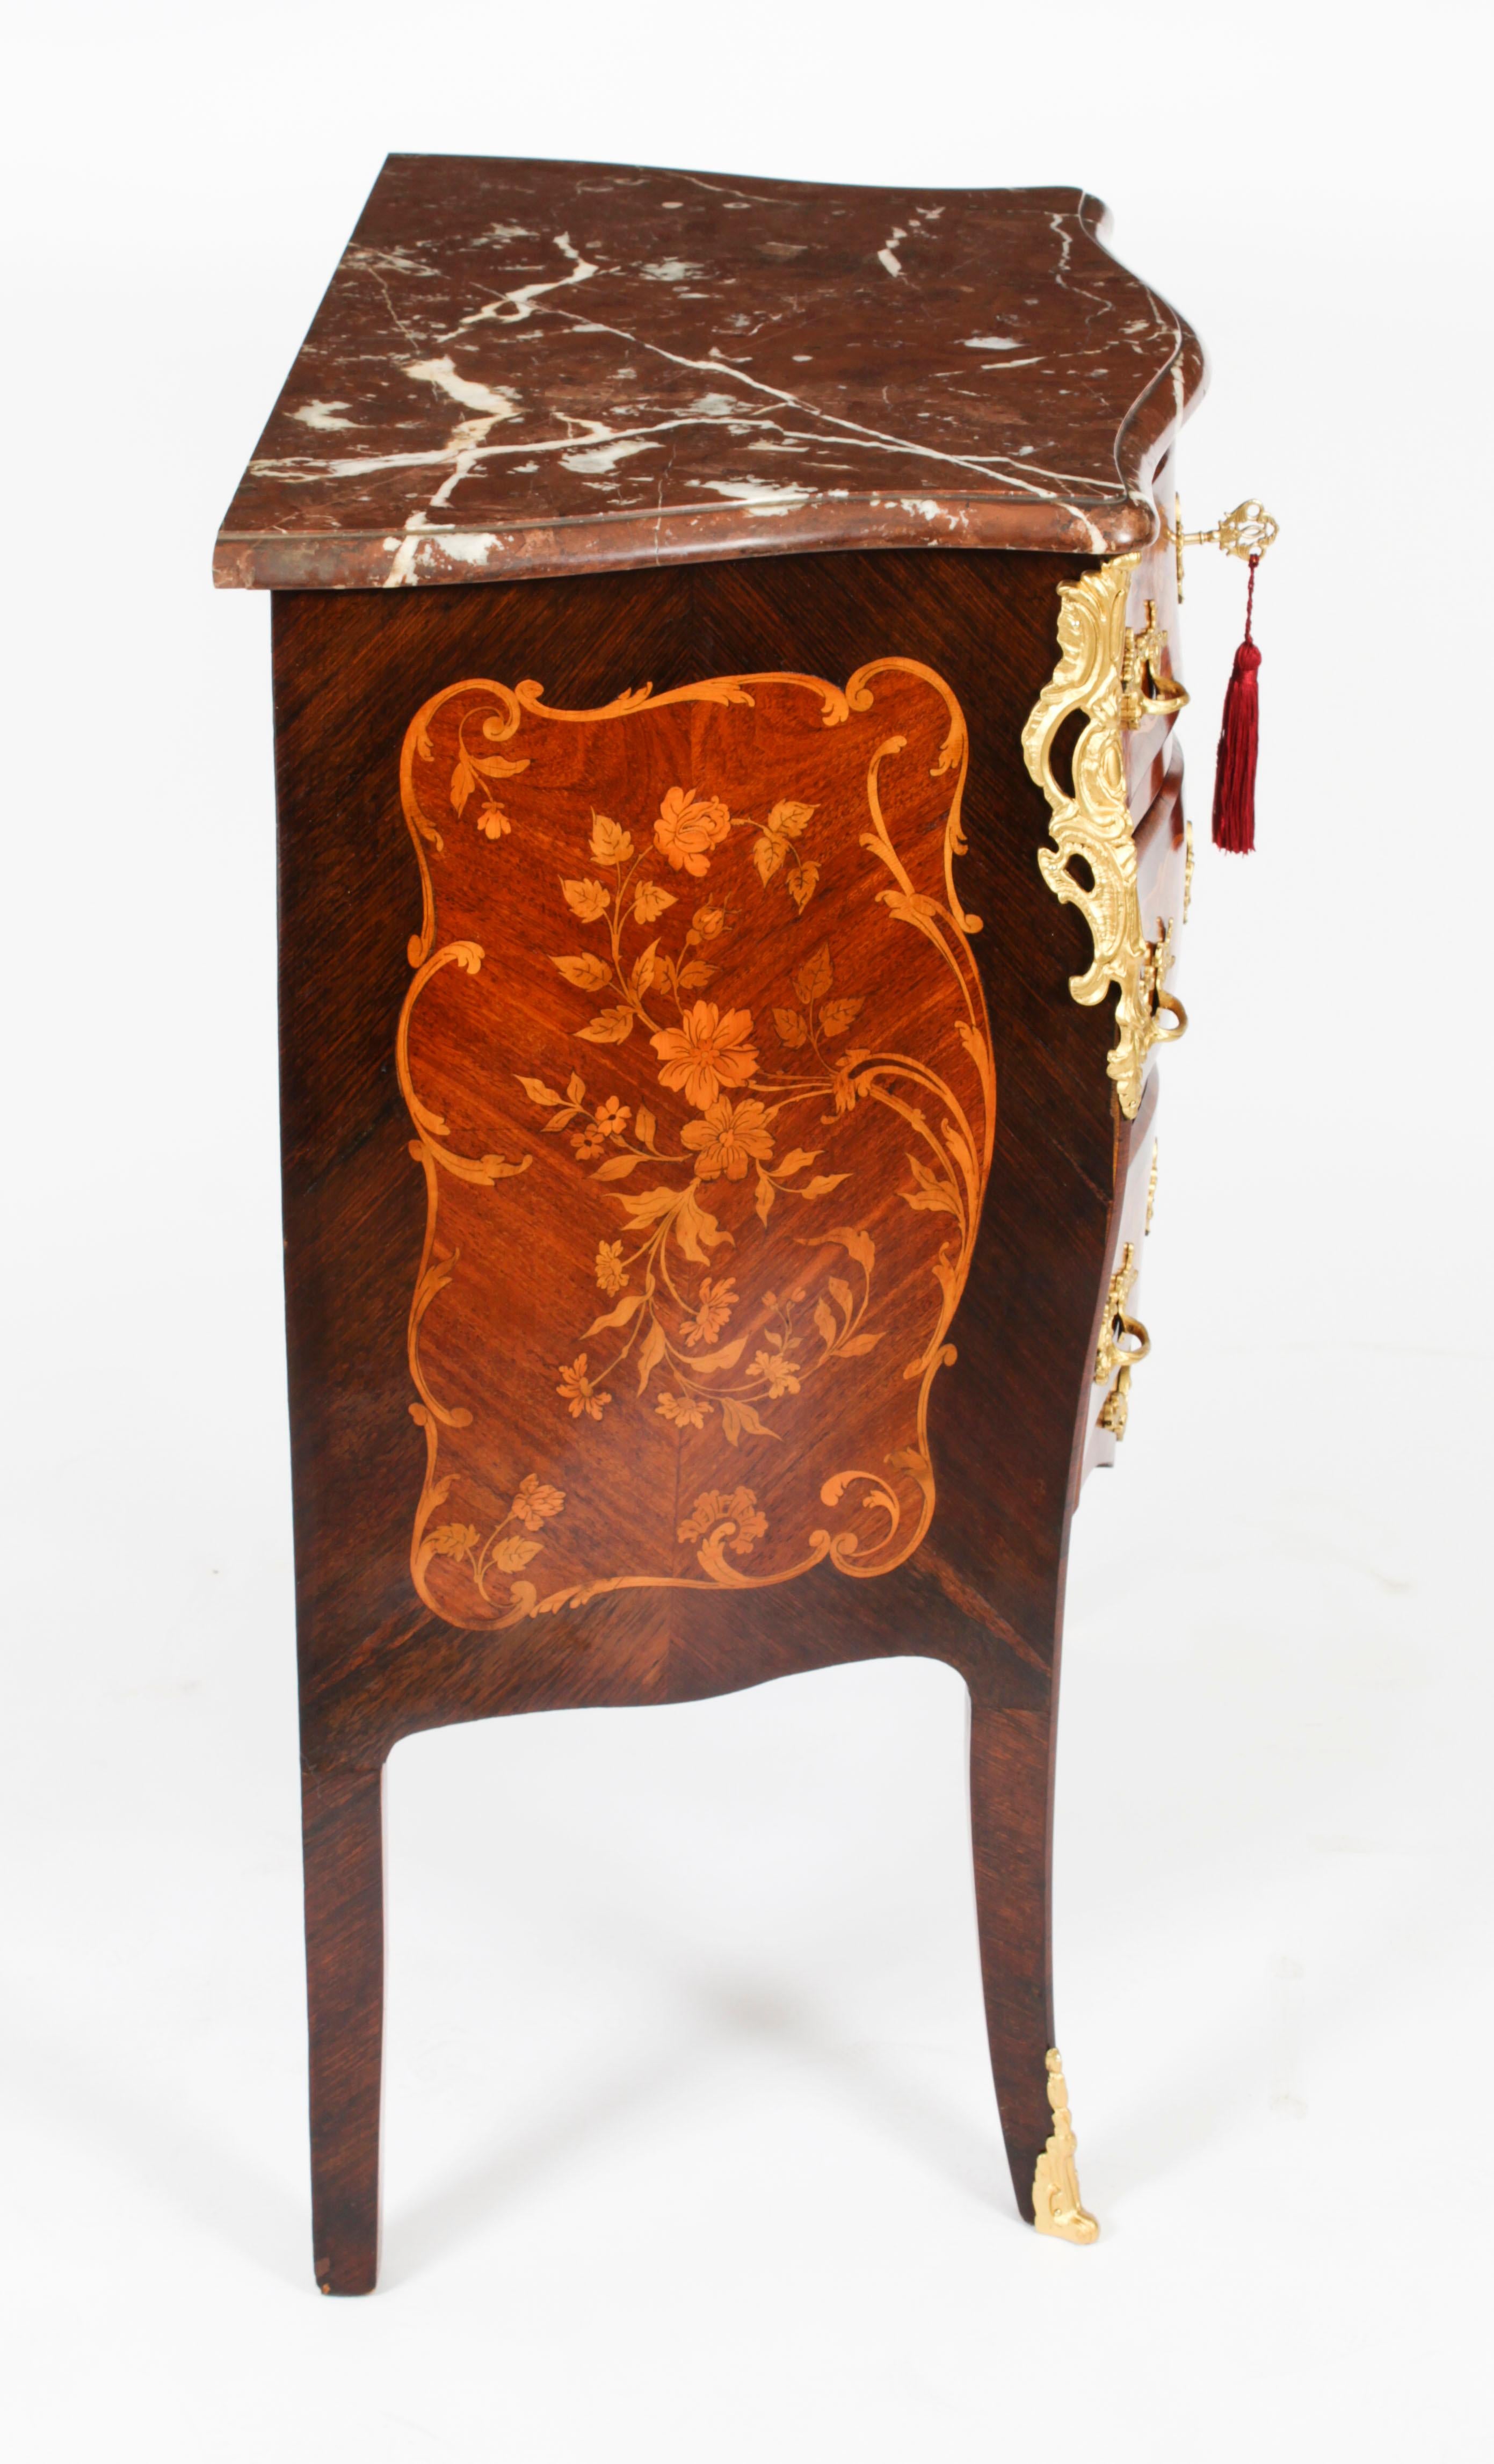 Antique French Louis Revival Gonçalo Alvest Marquetry Commode 19th Century For Sale 11